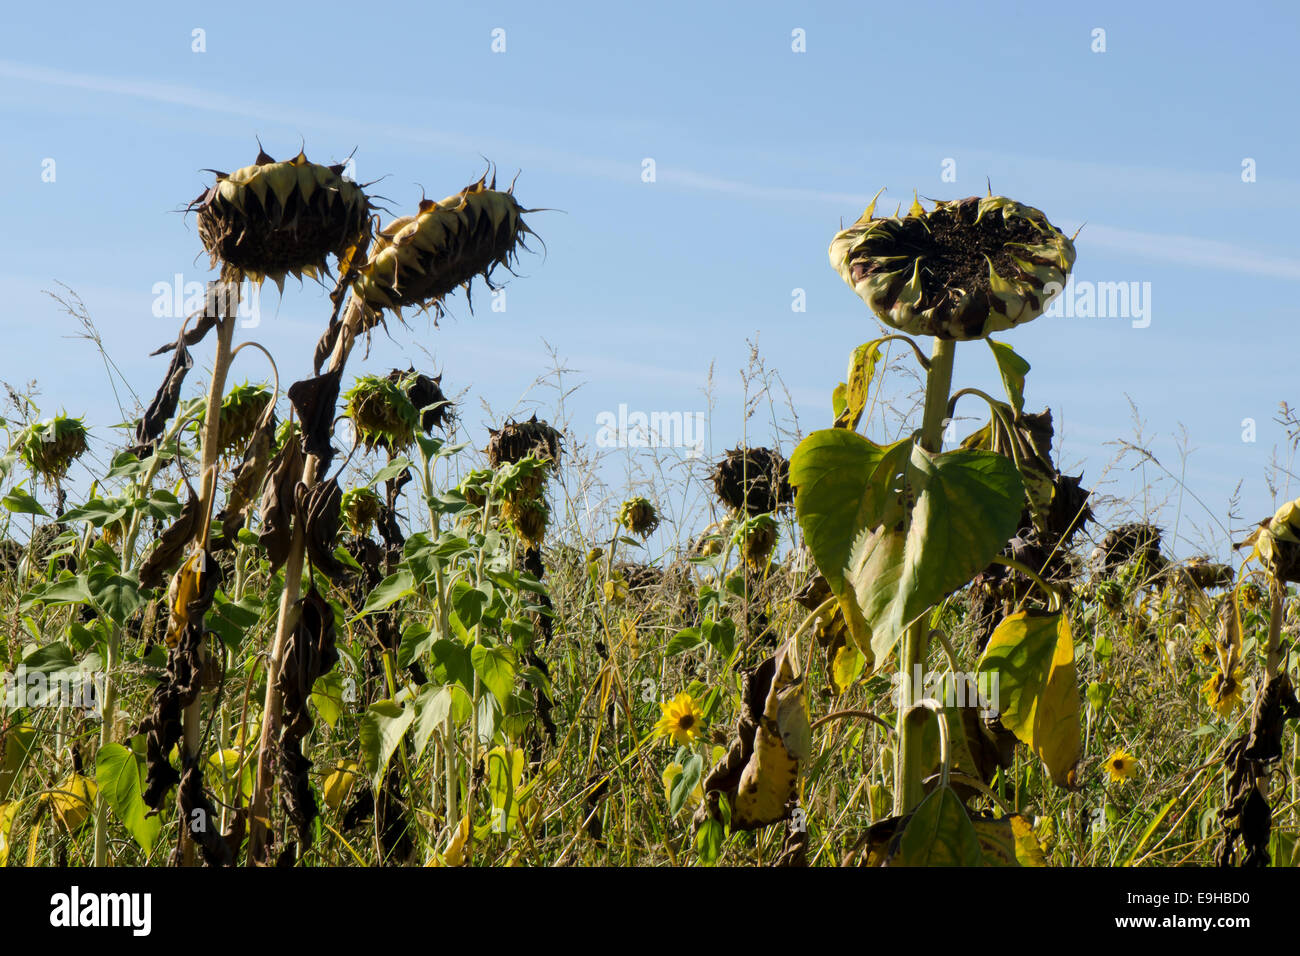 Field of sunflowers drying out in the sun until the seeds go black, before the harvest Stock Photo